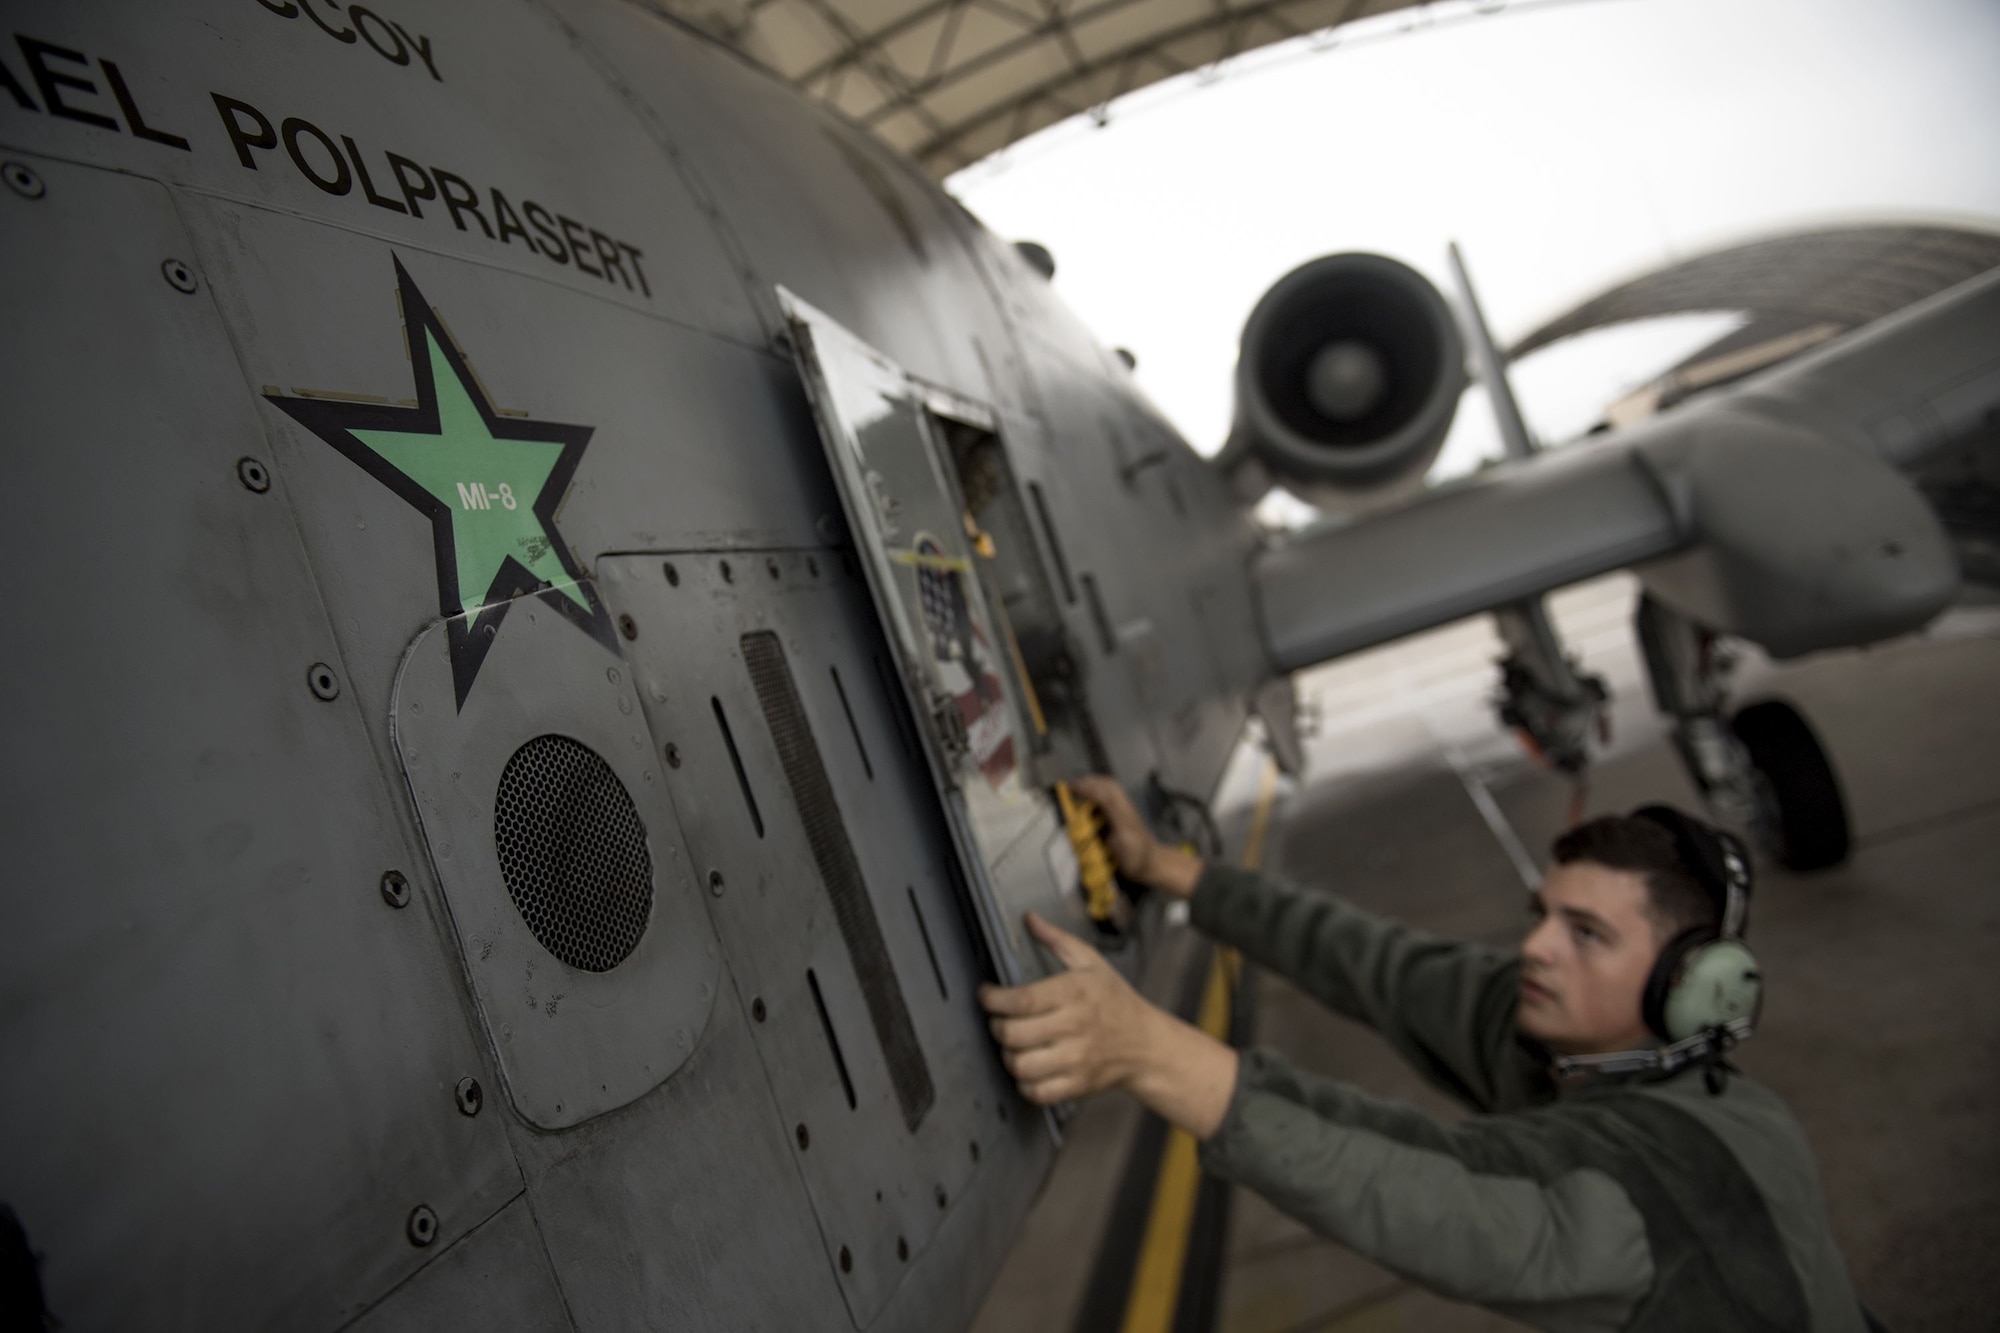 Airman 1st Class Kaya Schmidt, 74th Aircraft Maintenance Unit crew chief, secures an aircraft panel on the side of an A-10C Thunderbolt II, Dec. 6, 2017, at Moody Air Force Base, Ga. Moody’s week-long, Phase 1, Phase 2 exercise is designed to demonstrate the 23d Wing’s ability to meet combatant commander objectives and tested the pilots’ and maintainers’ ability to launch around-the-clock sorties at an accelerated rate during a sortie surge. (U.S. Air Force photo by Staff Sgt. Ryan Callaghan)